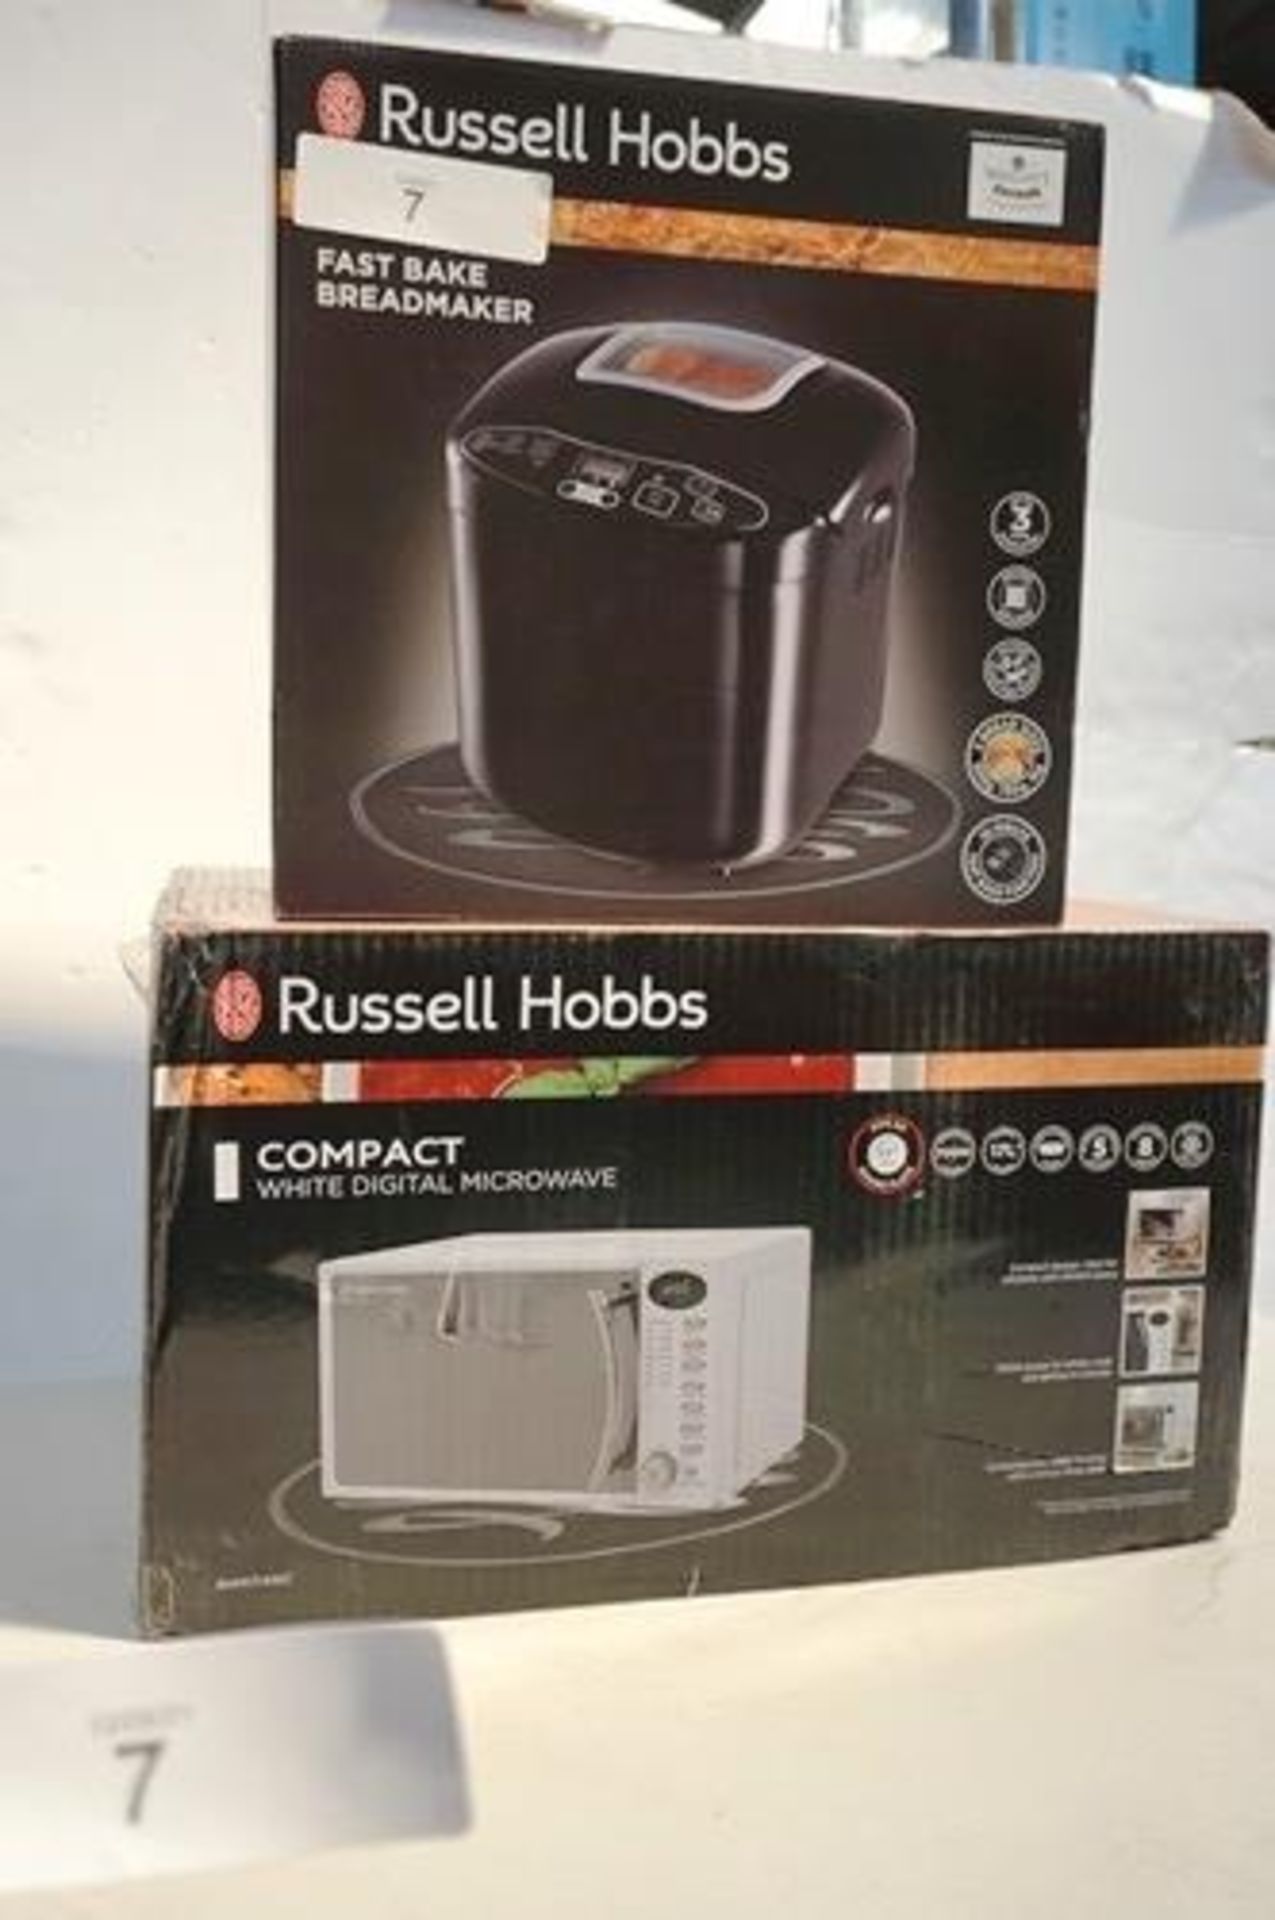 1 x Russell Hobbs white digital microwave, model RHM1714WC, together with 1 x Russell Hobbs Fast